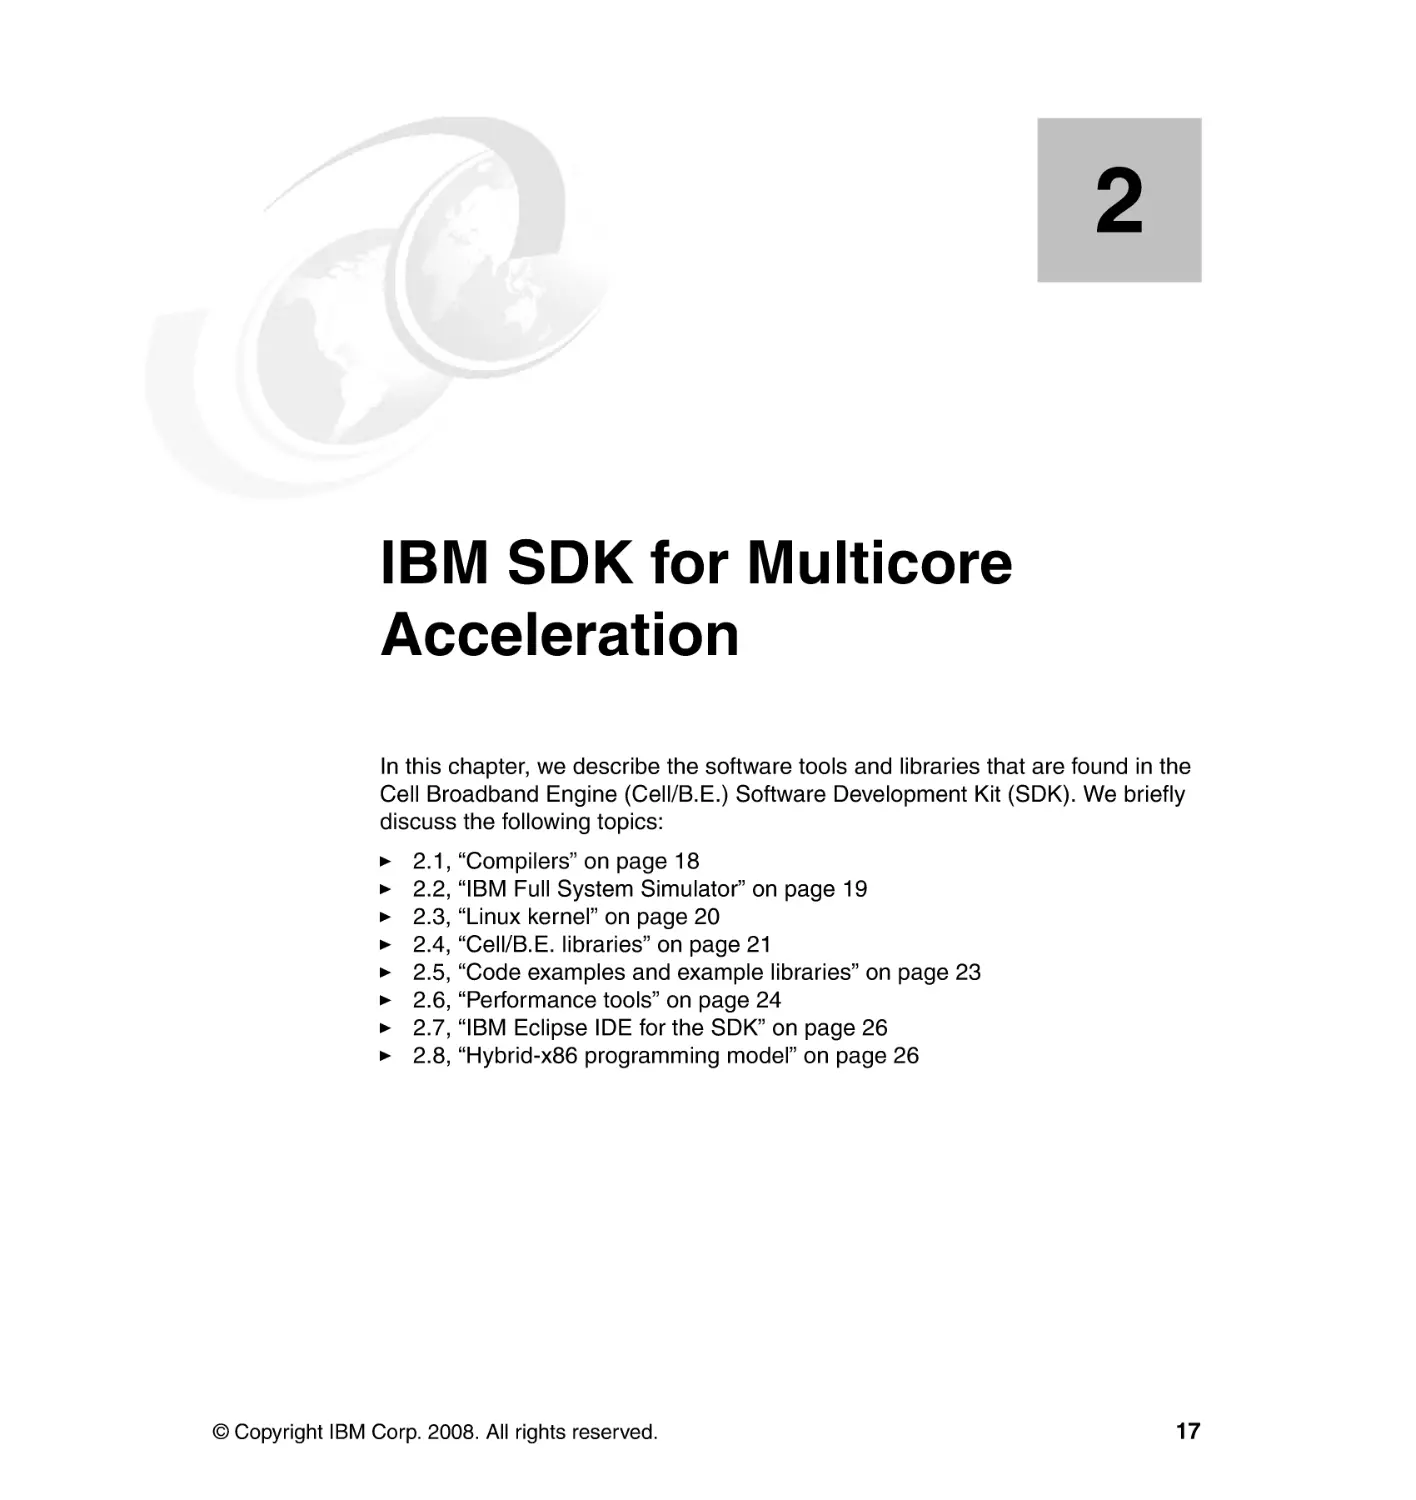 Chapter 2. IBM SDK for Multicore Acceleration